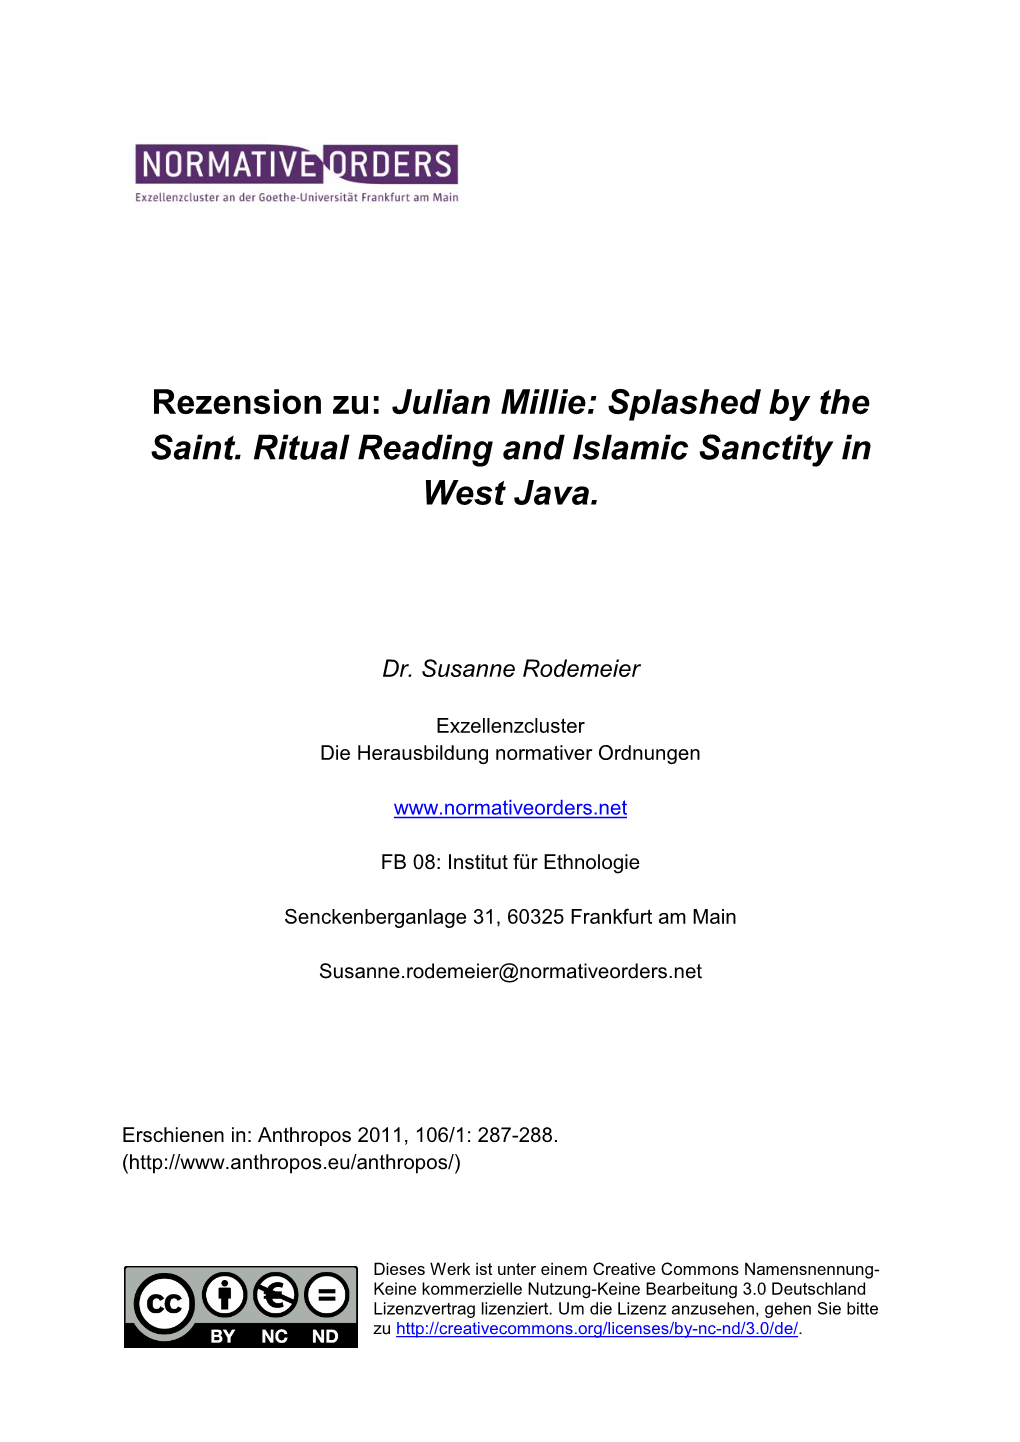 Rezension Zu: Julian Millie: Splashed by the Saint. Ritual Reading and Islamic Sanctity in West Java